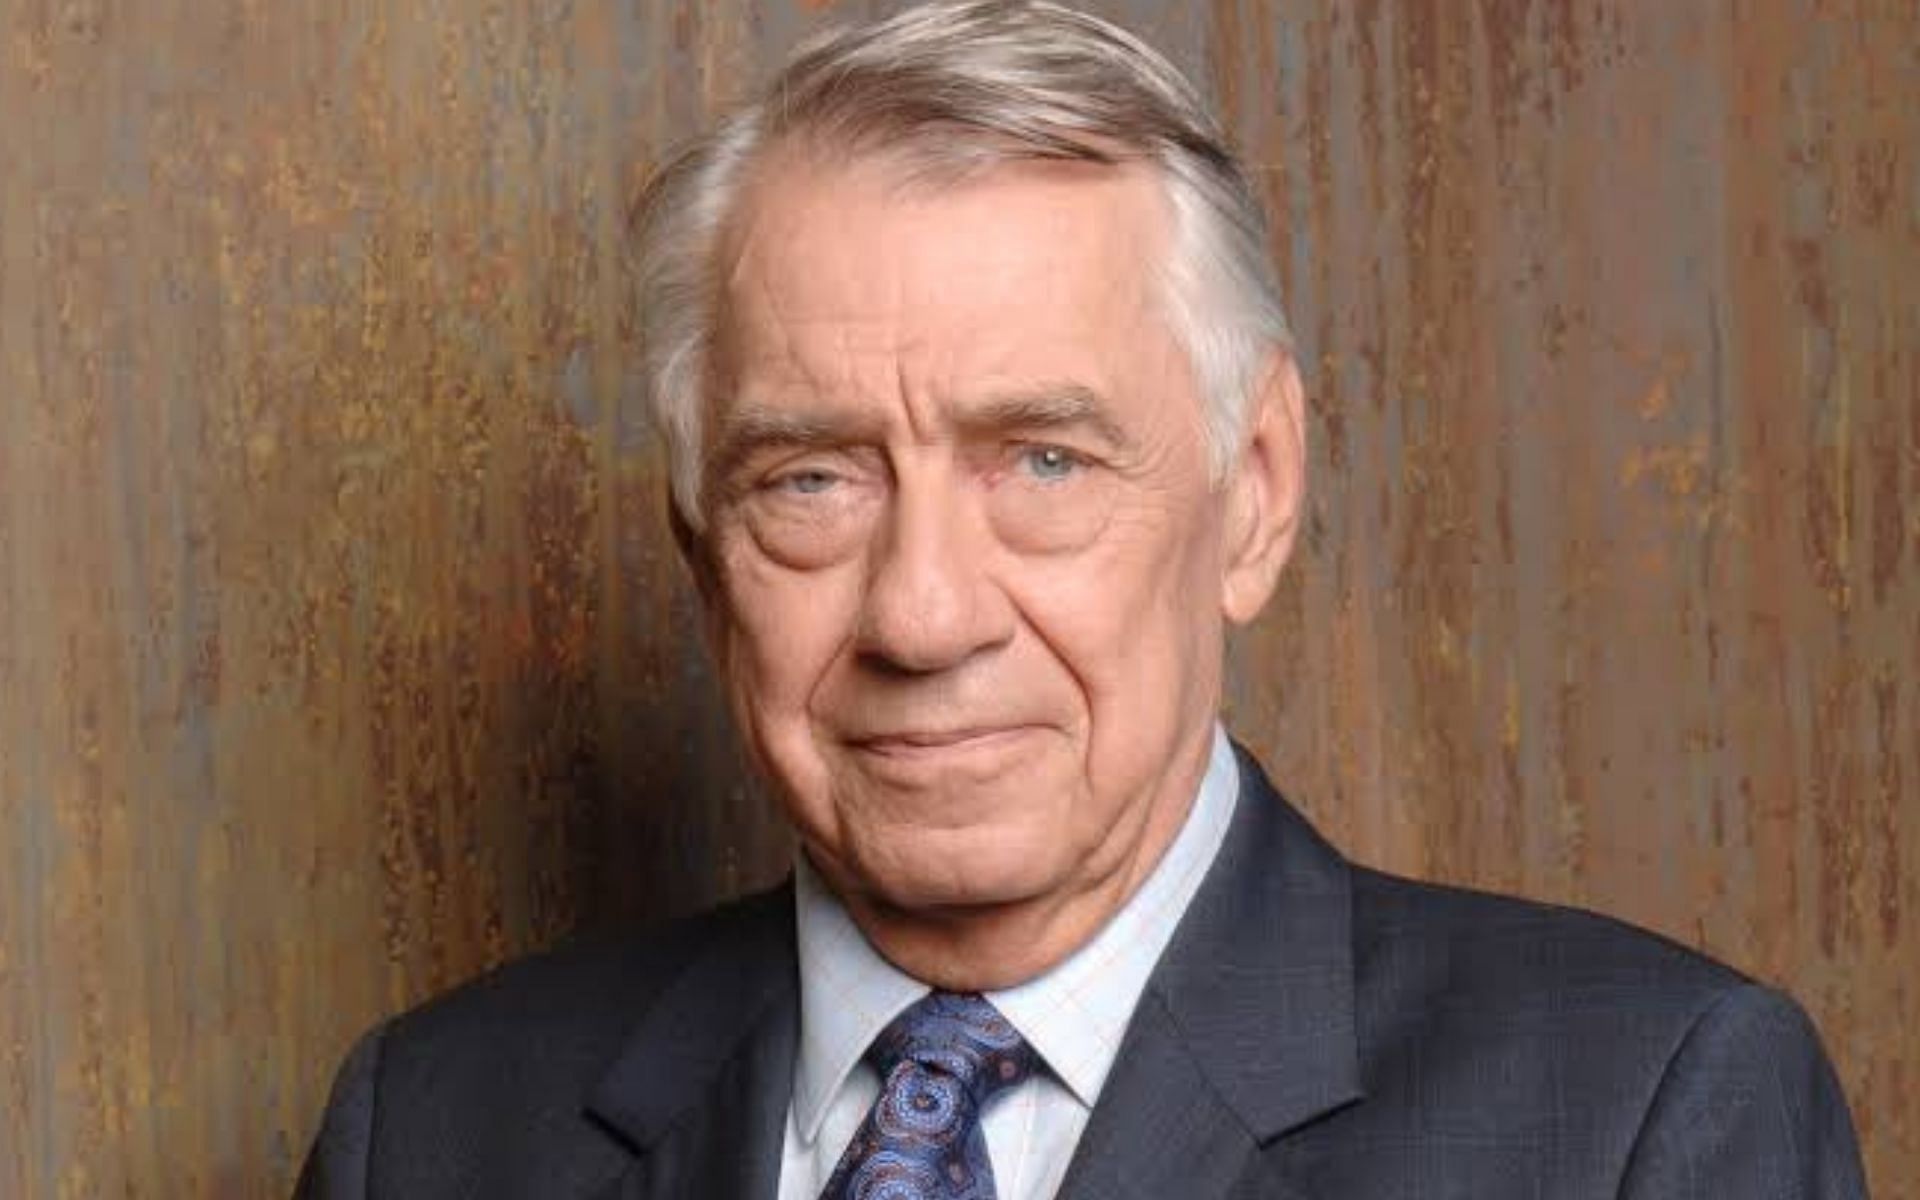 Philip Baker Hall (Image via Getty Images)